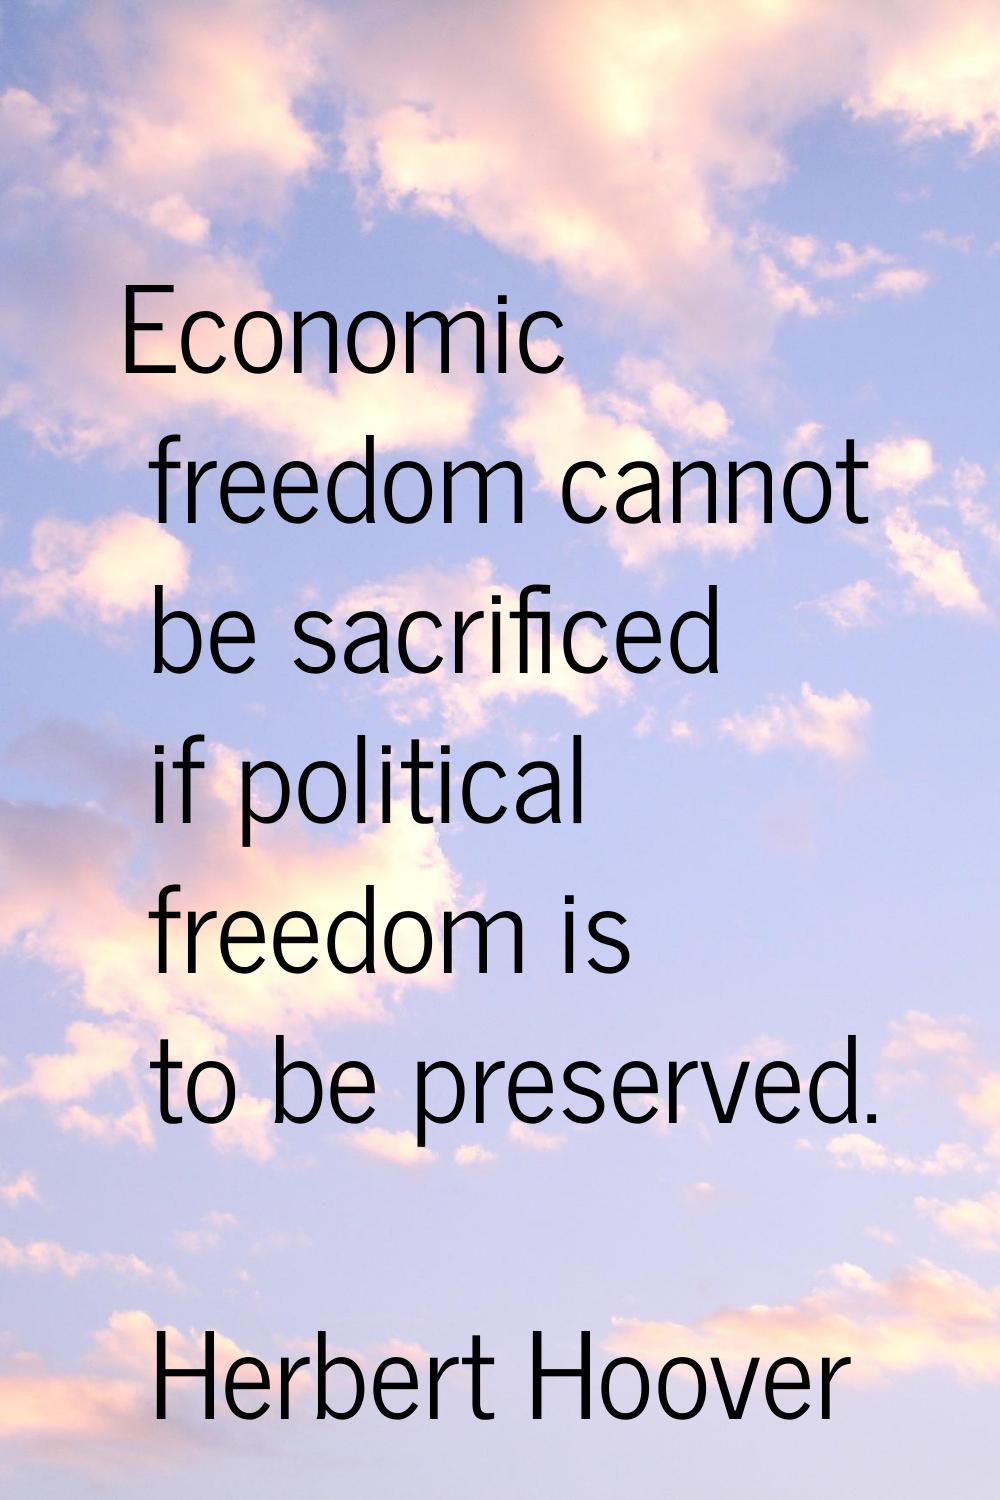 Economic freedom cannot be sacrificed if political freedom is to be preserved.